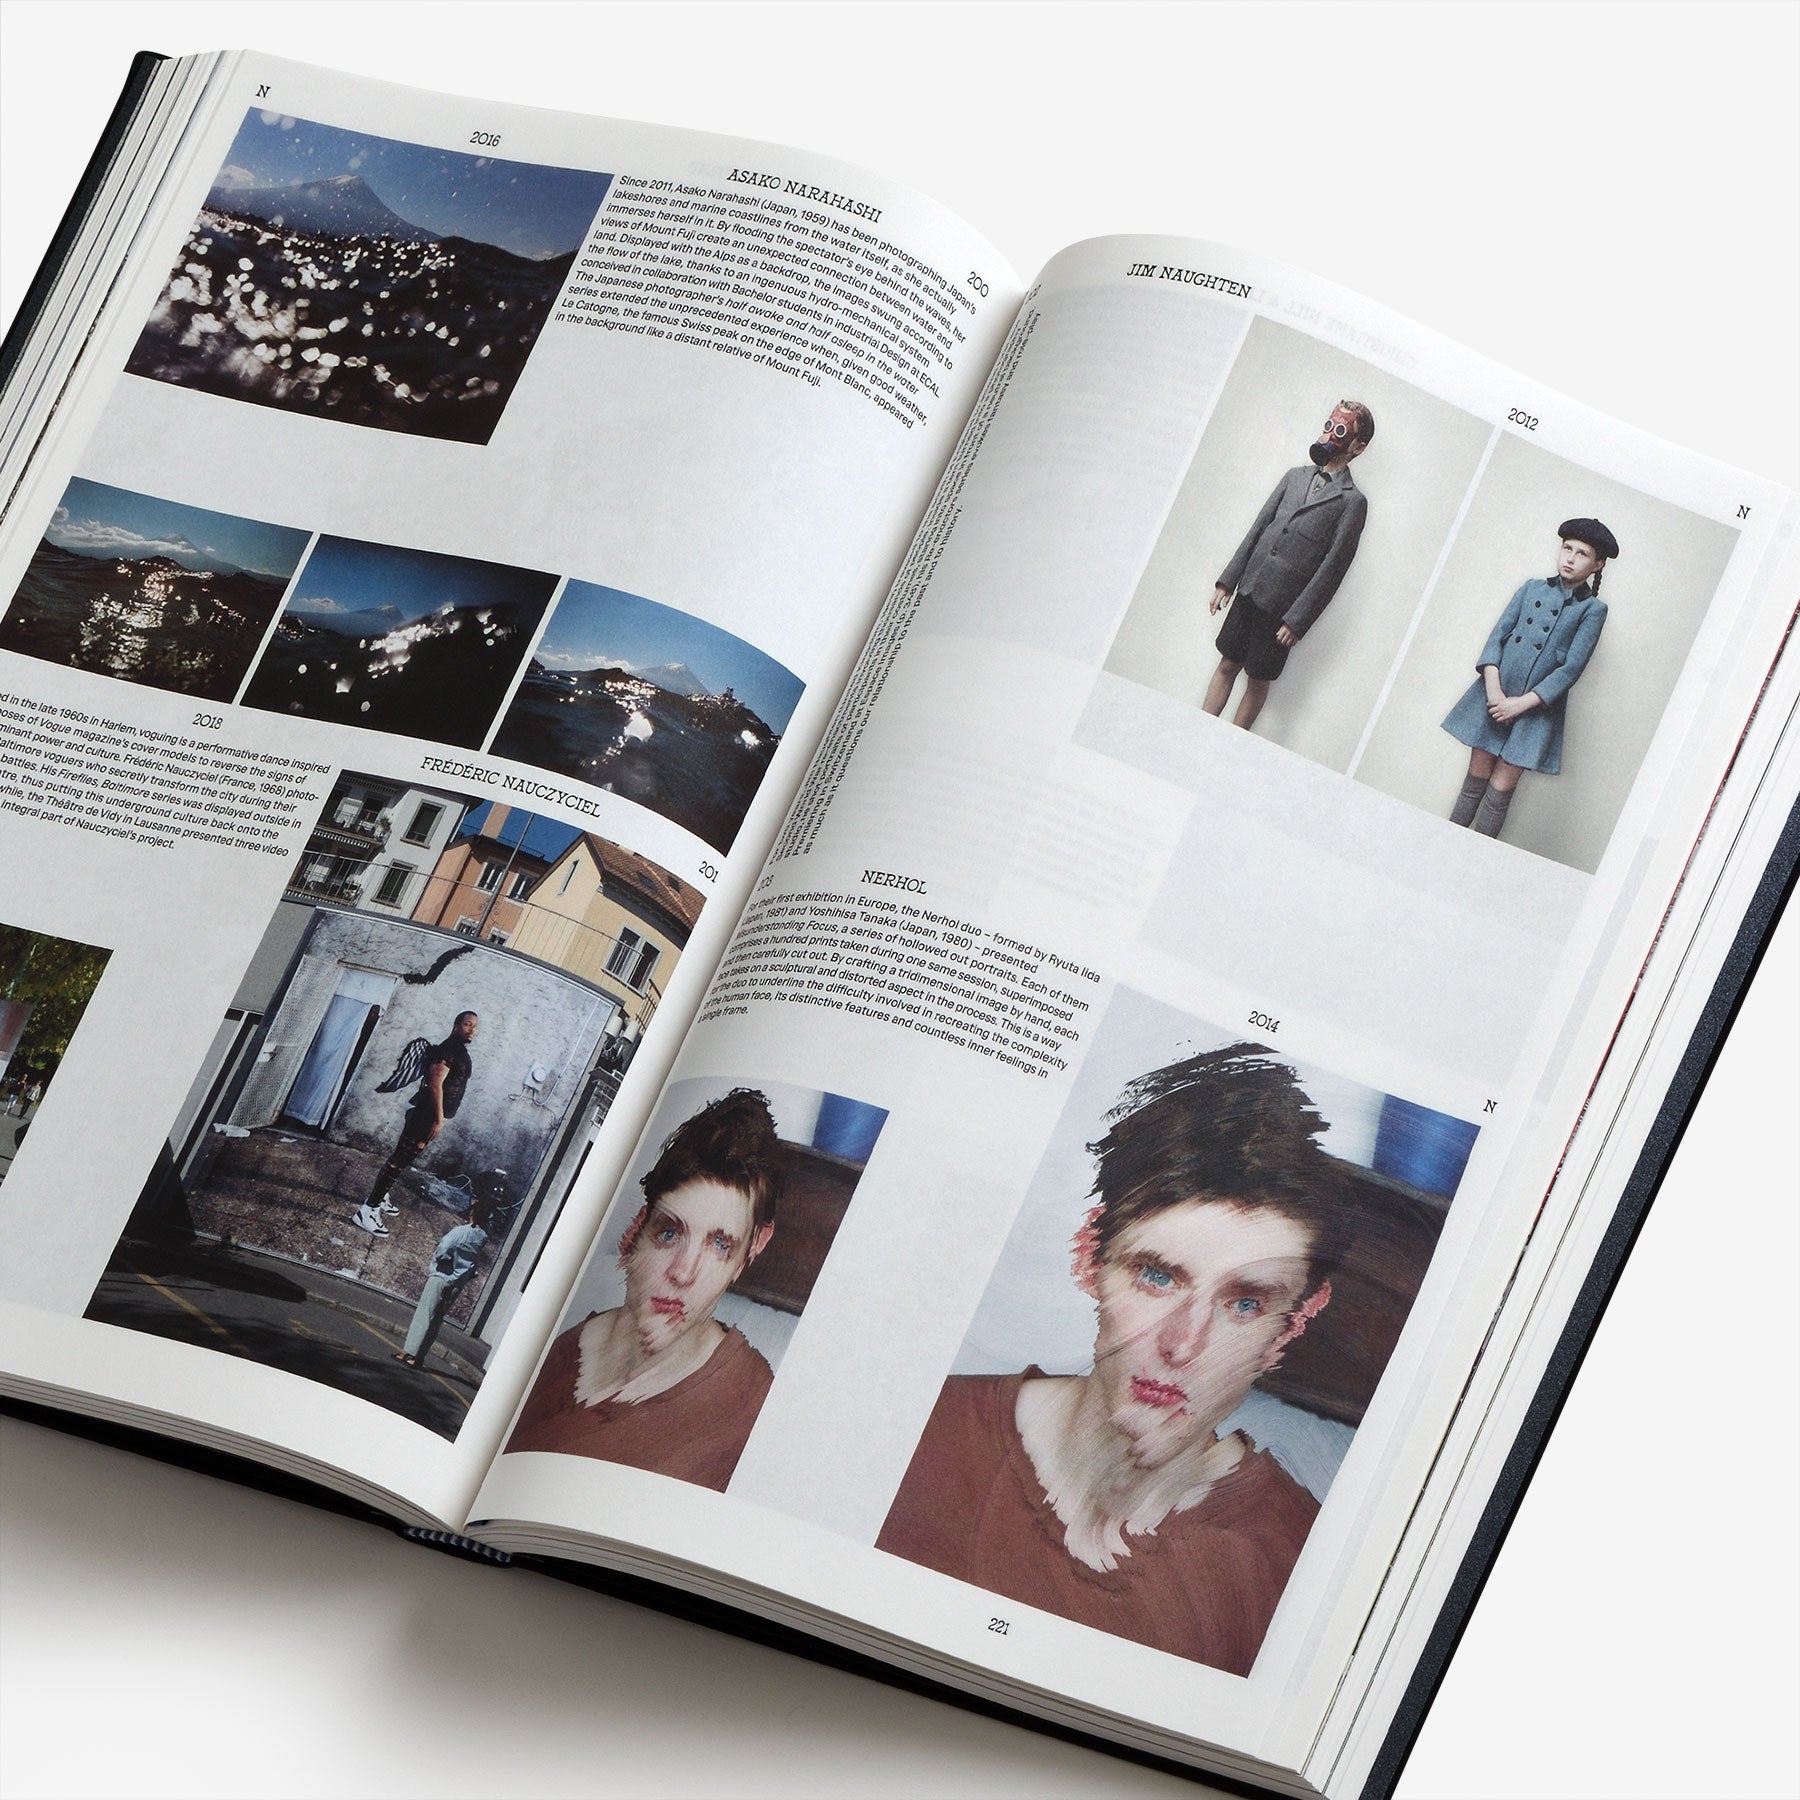 The Book of Images: An Illustrated Dictionary of Visual Experiences